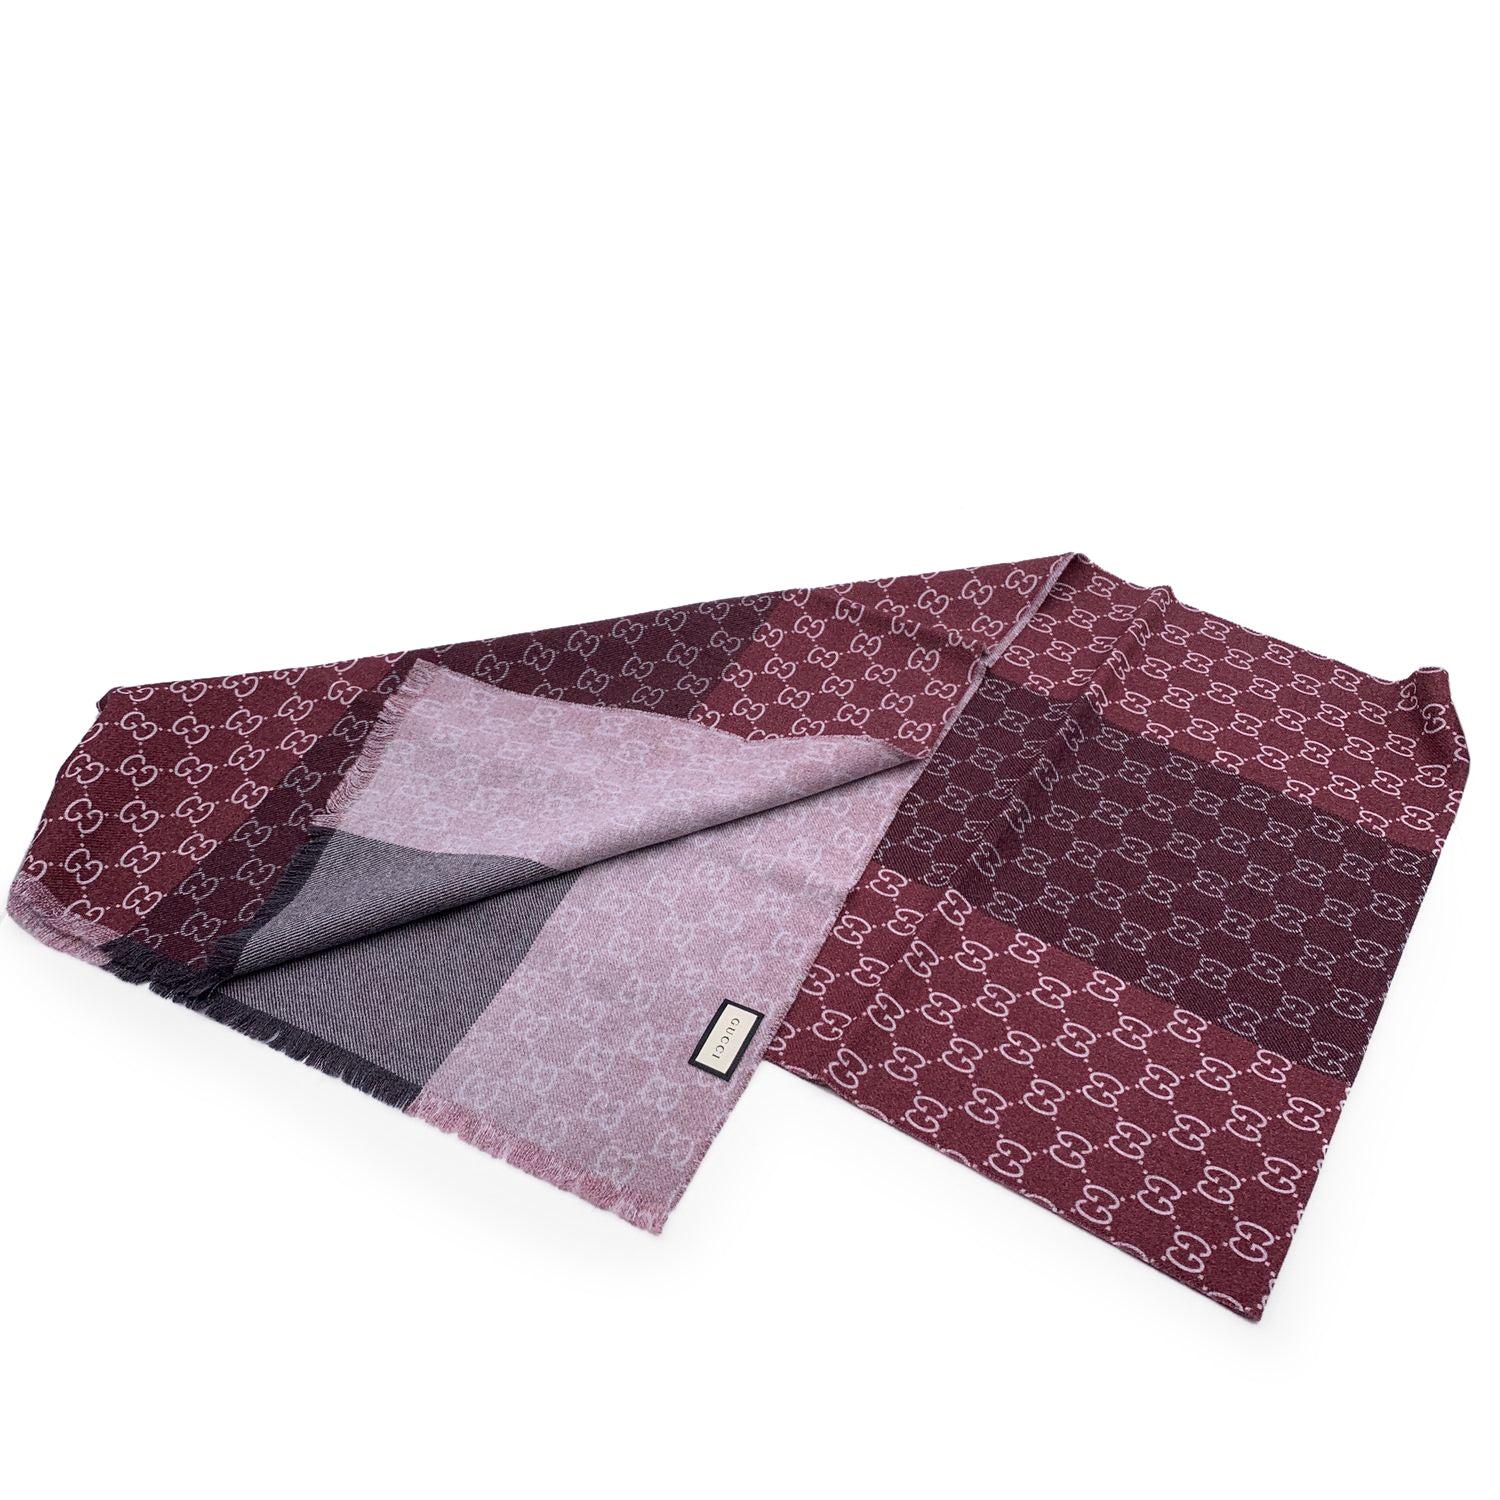 Women's or Men's Gucci Burgundy Wool GG Guccissima Scarf Shawl Wrap For Sale